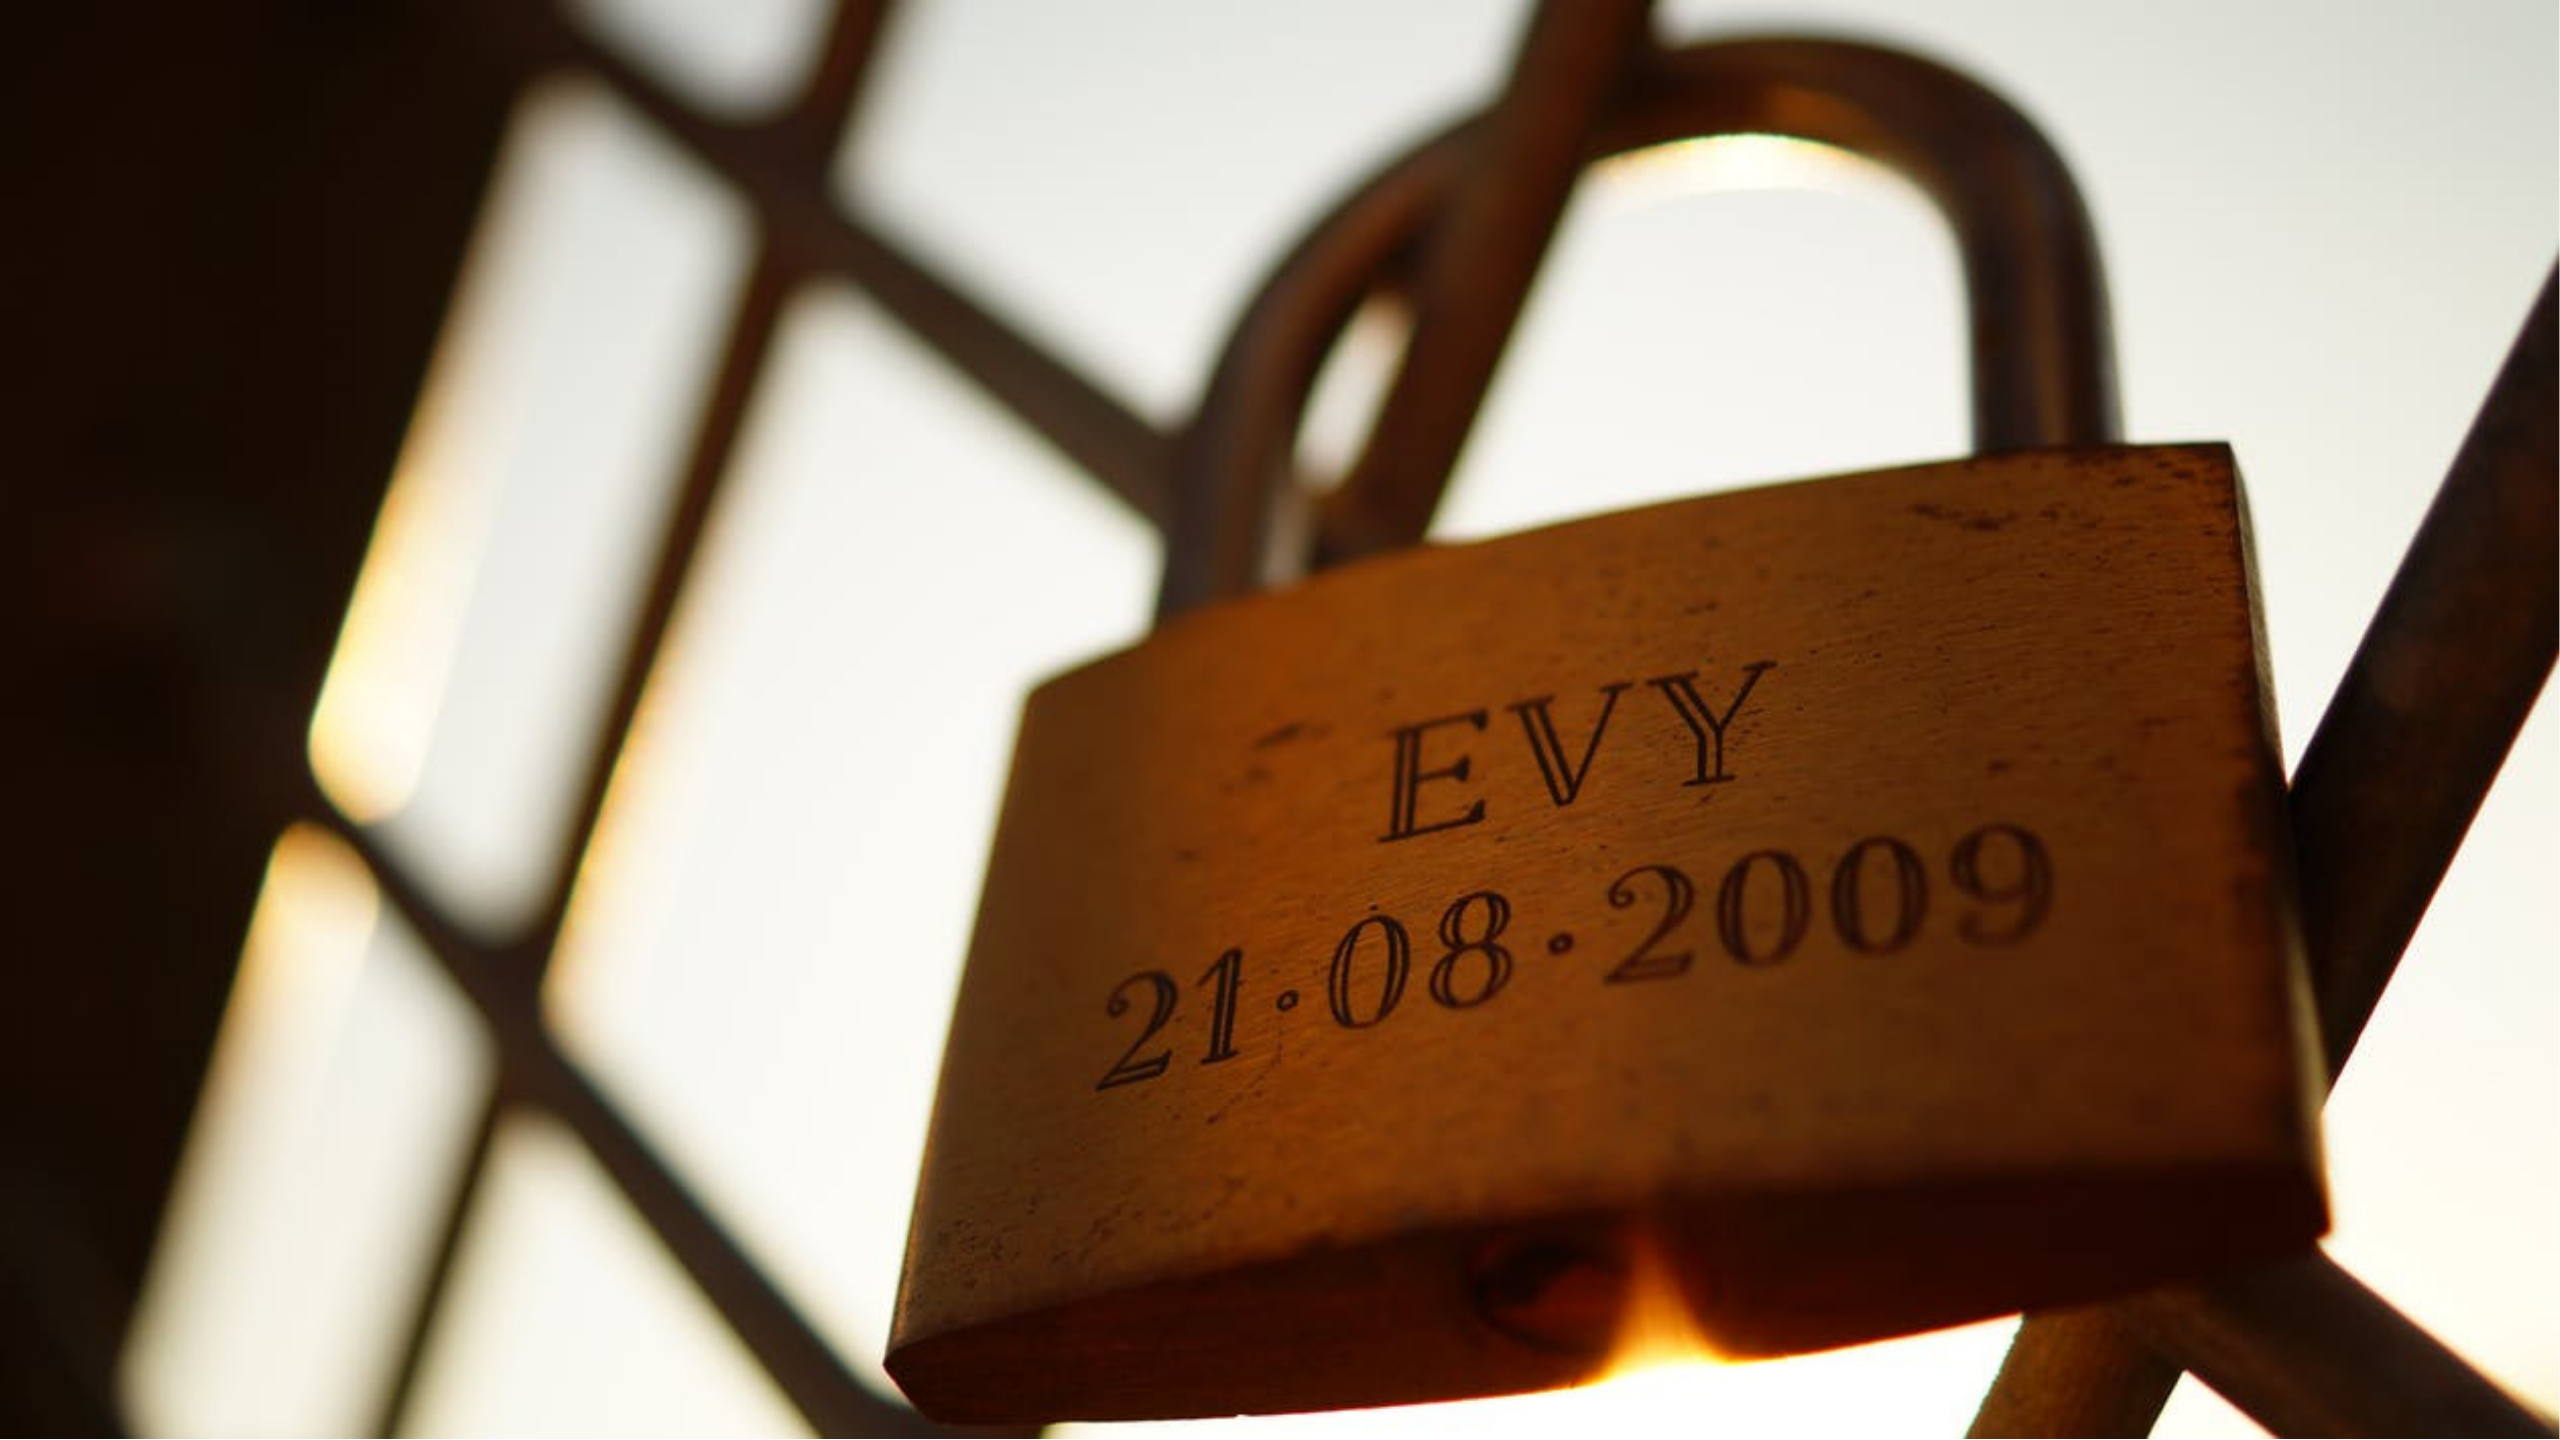 Gold padlock with name Evy and date 21-08-2009 attached to a metal bridge demonstrating union with your stoma